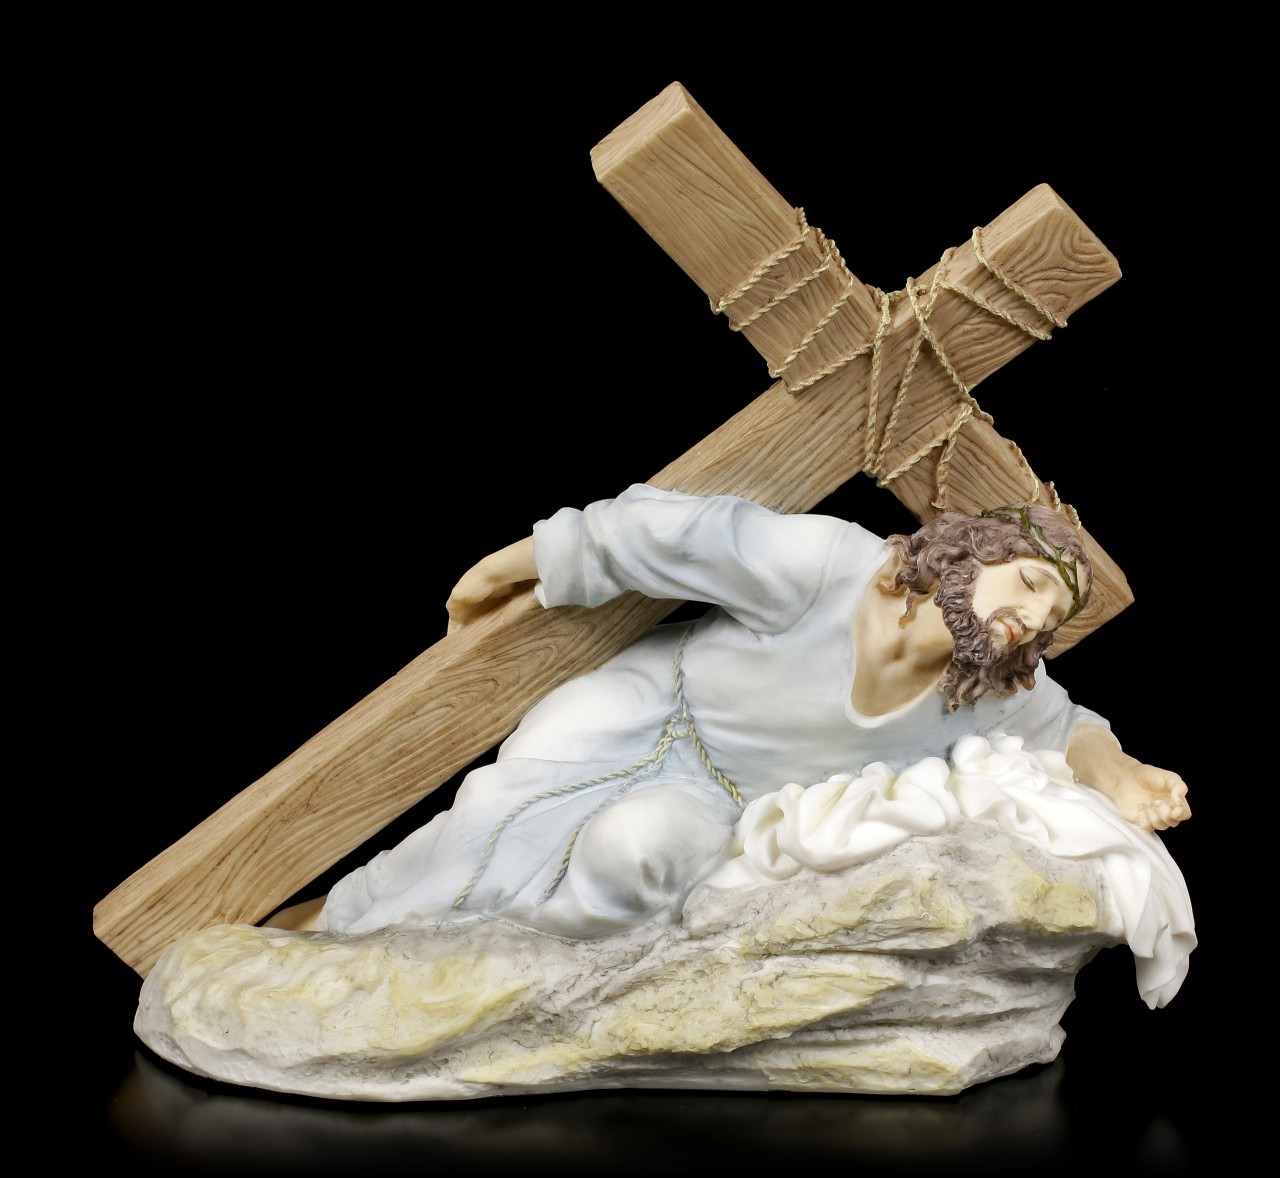 Jesus Figurine - On the Way of the Cross - colored